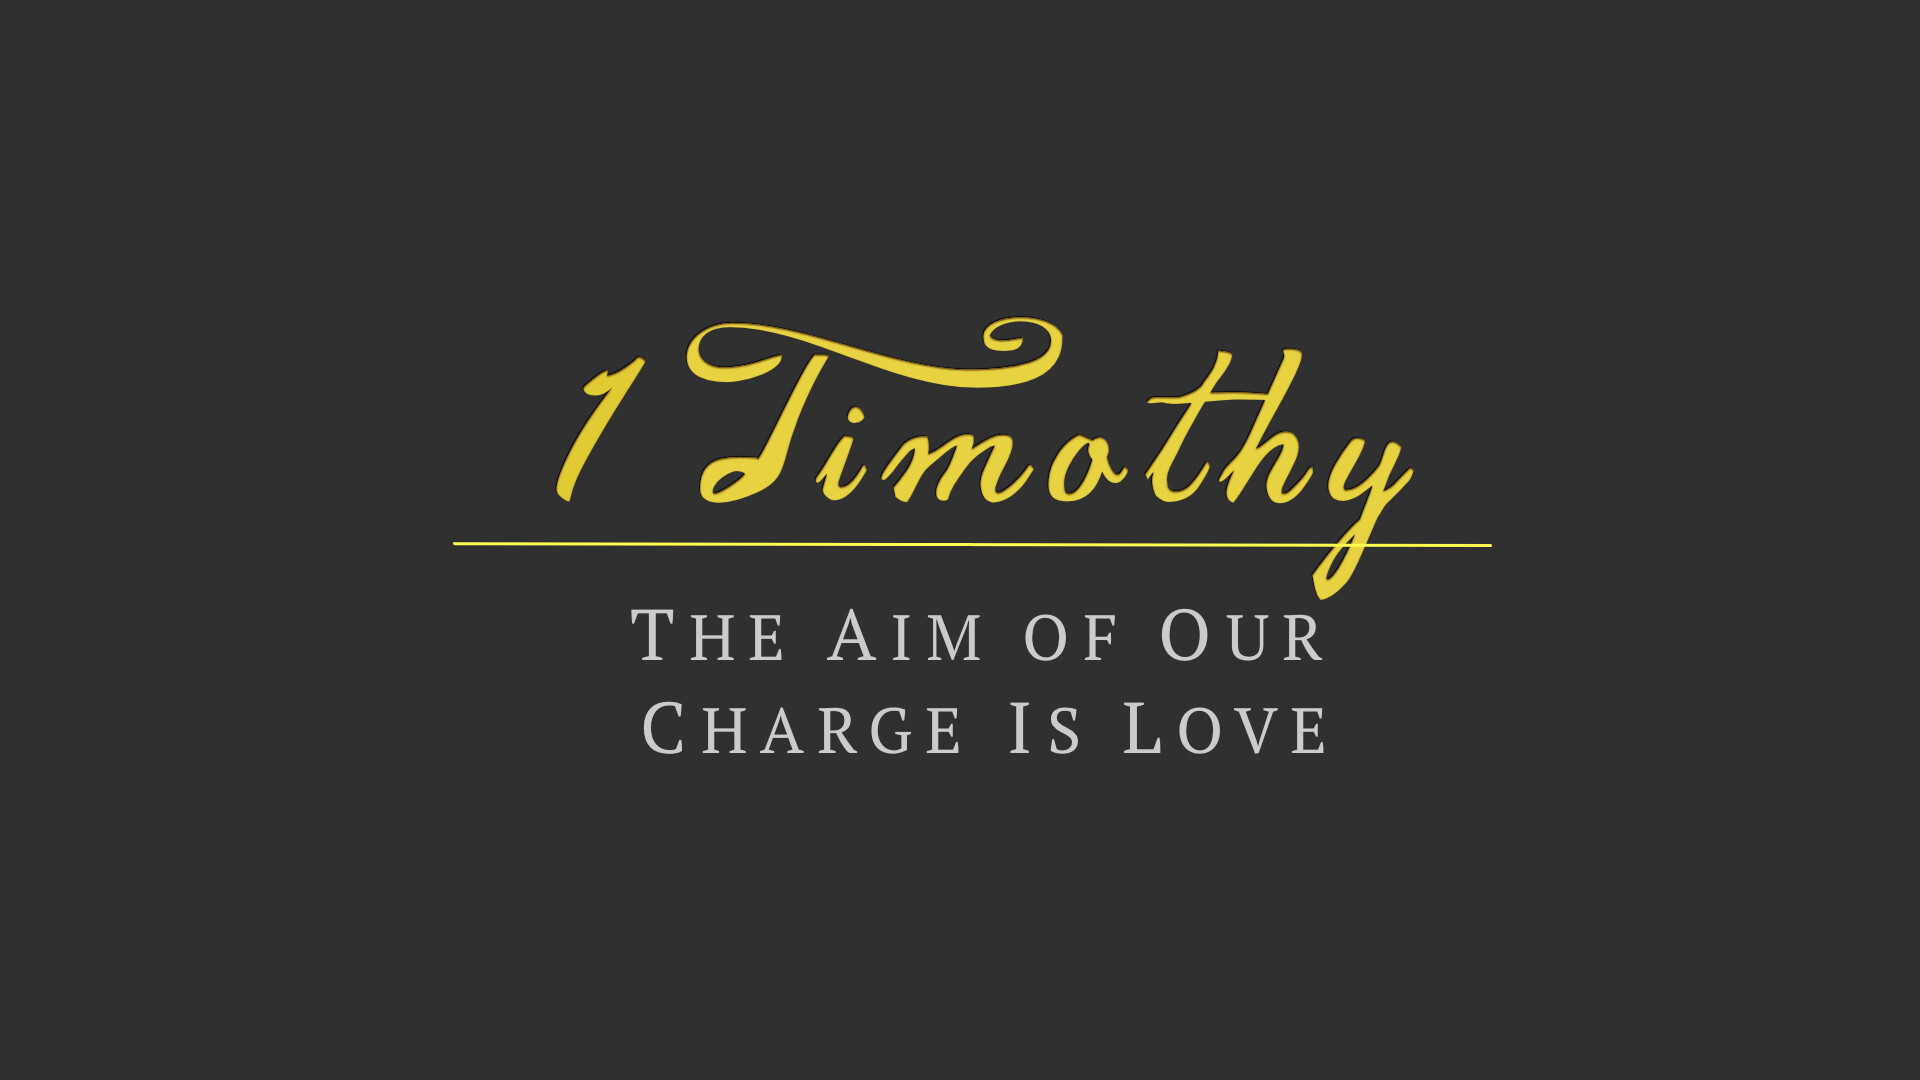 The Aim of Our Charge Is Love